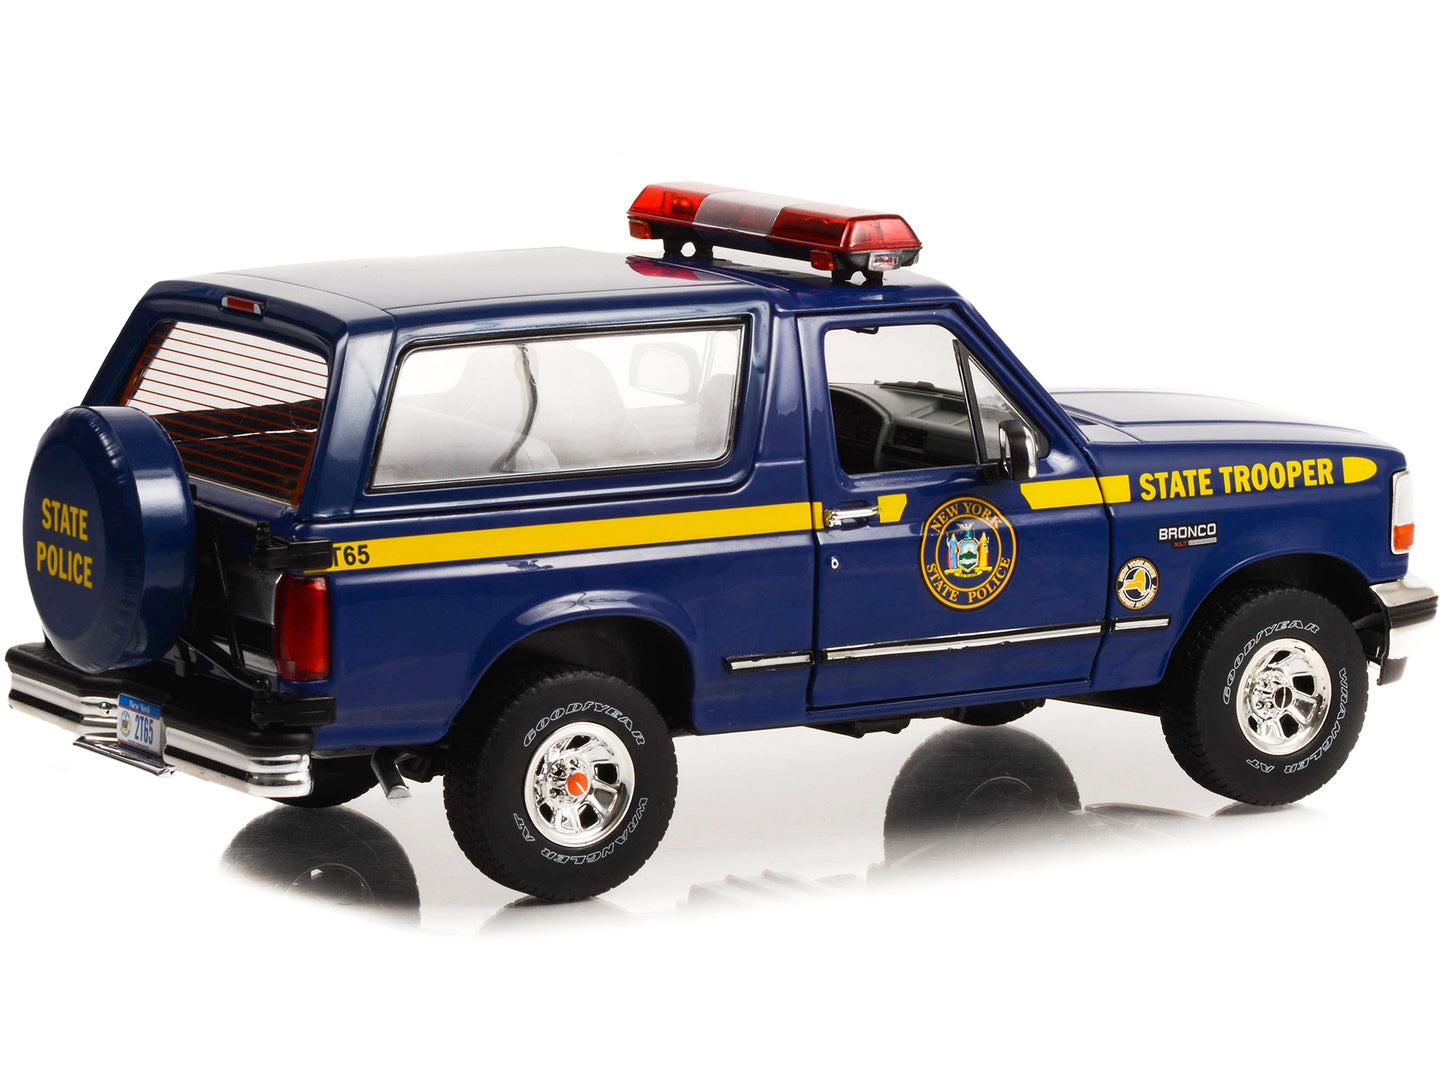 1996 Ford Bronco XLT Dark Blue "New York State Police" "Artisan Collection" 1/18 Diecast Model Car by Greenlight